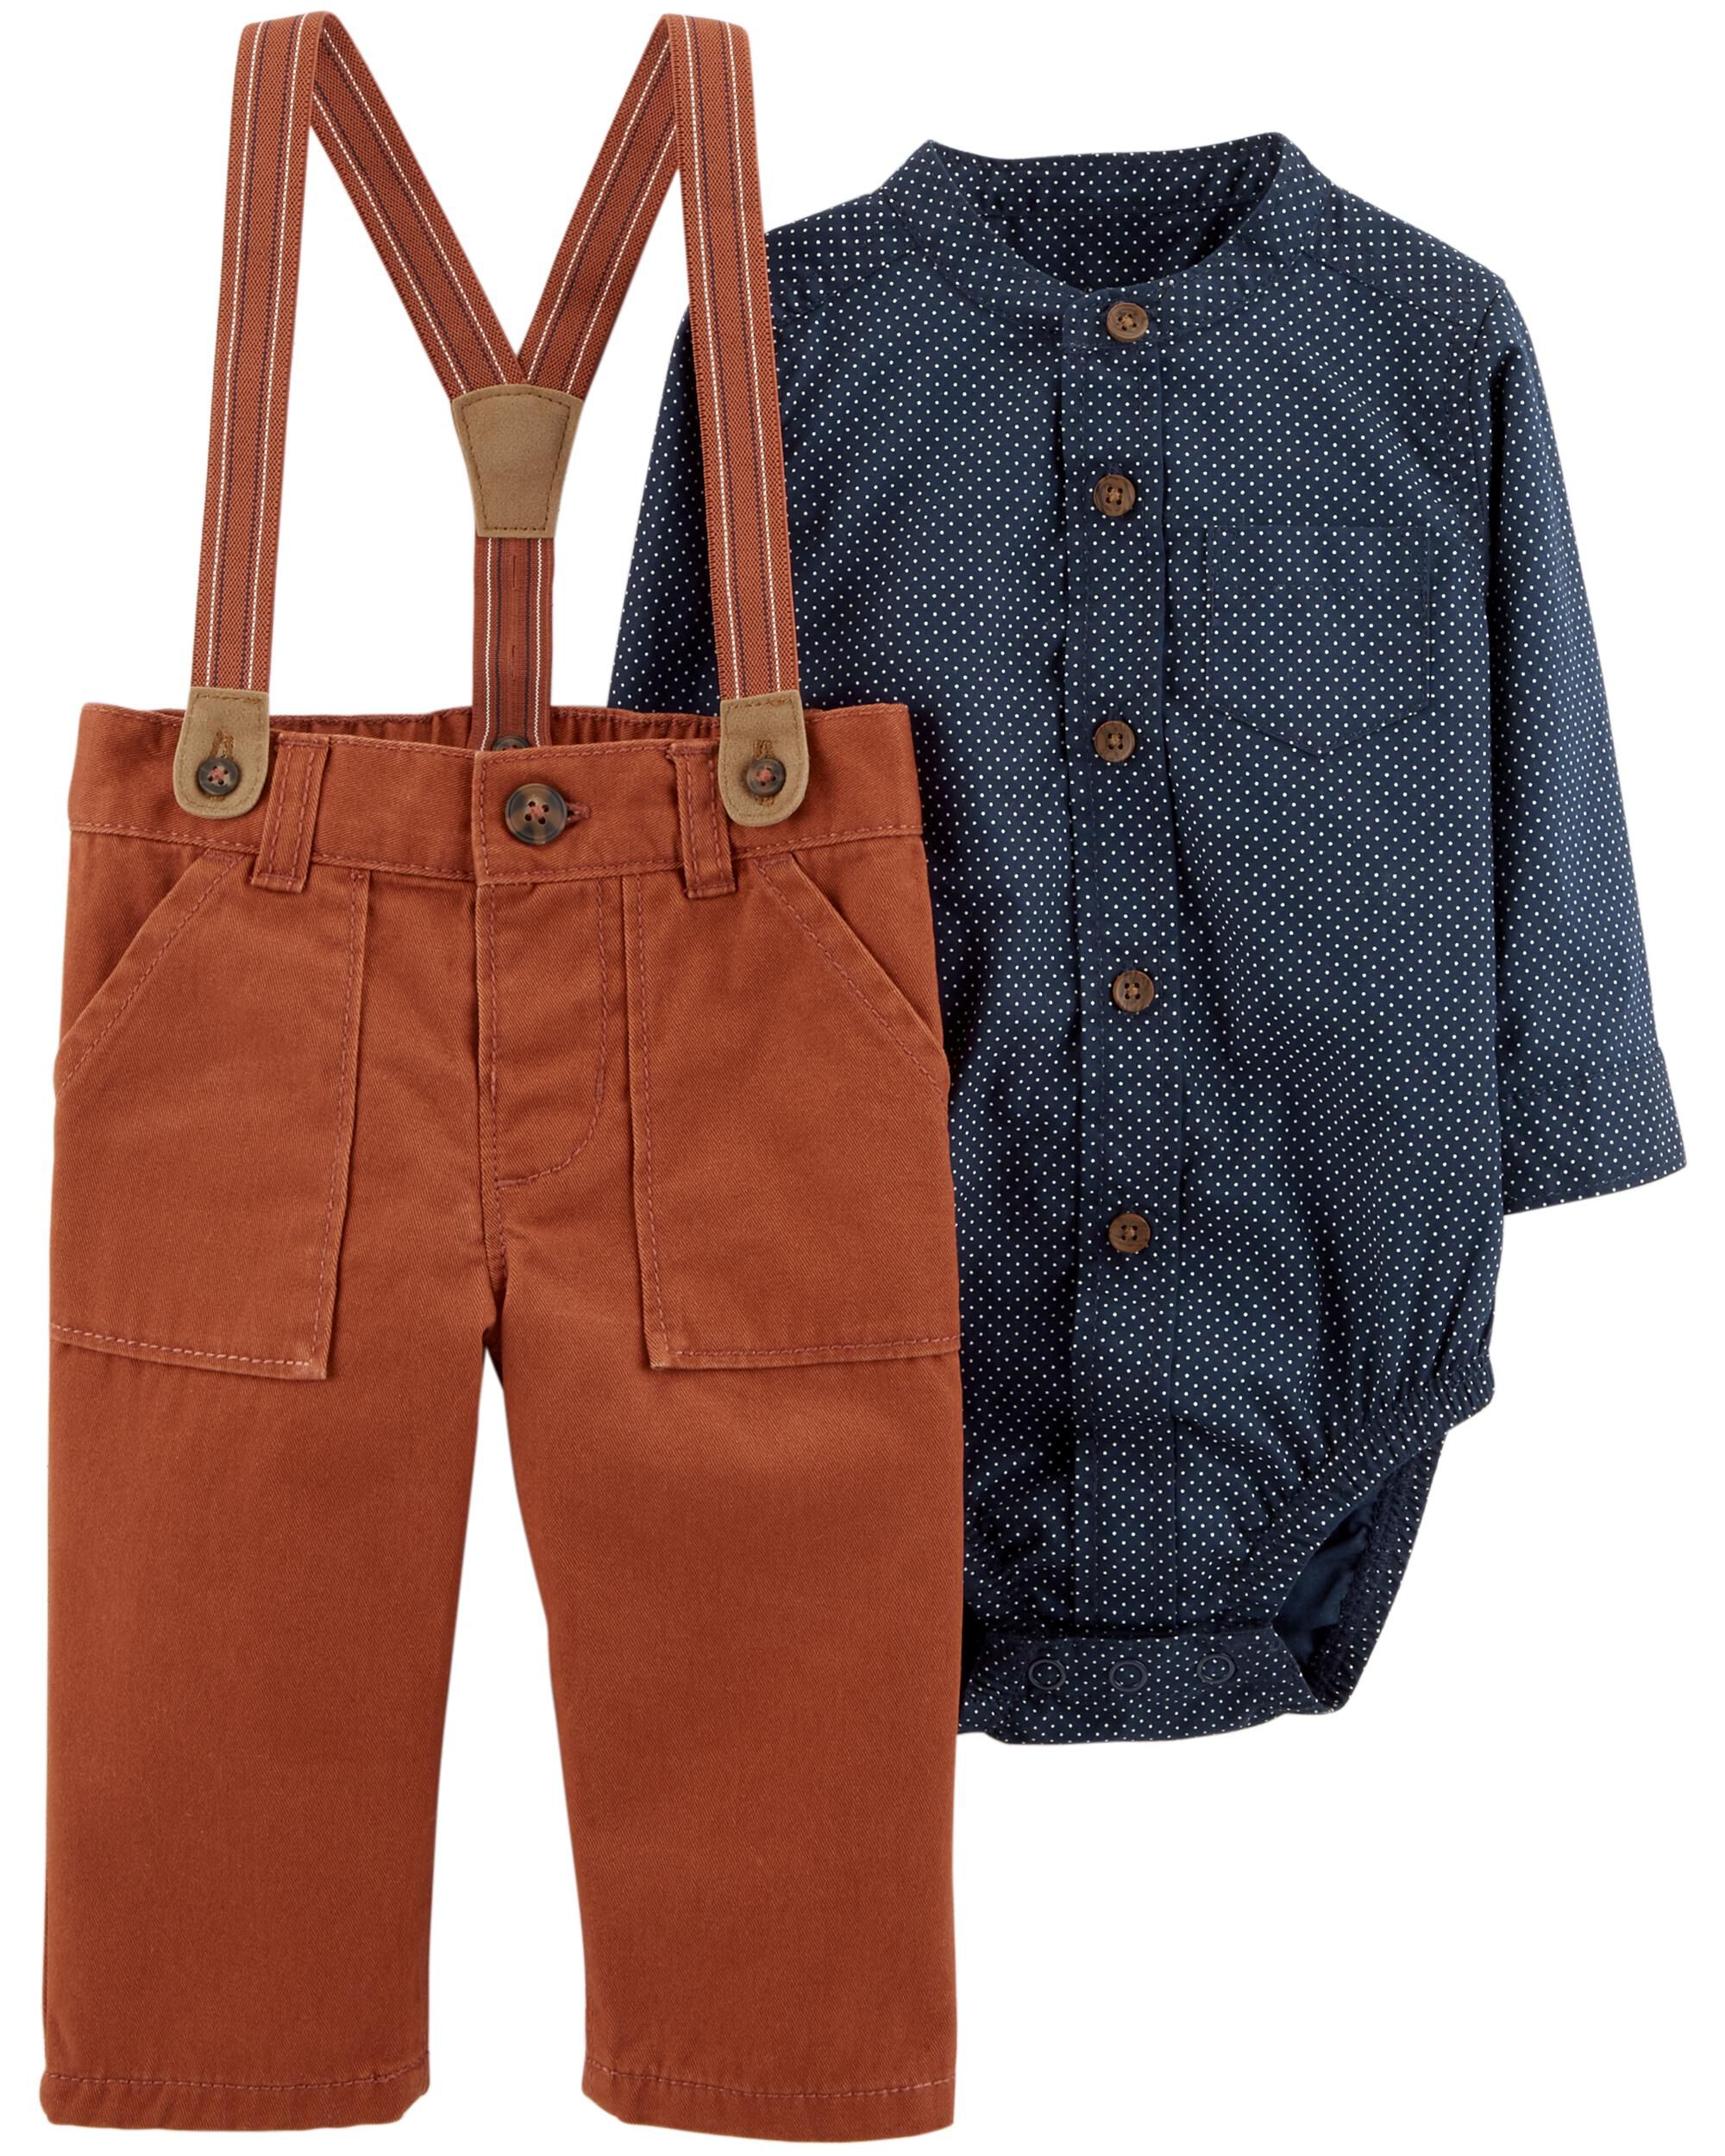 carters suspender outfit